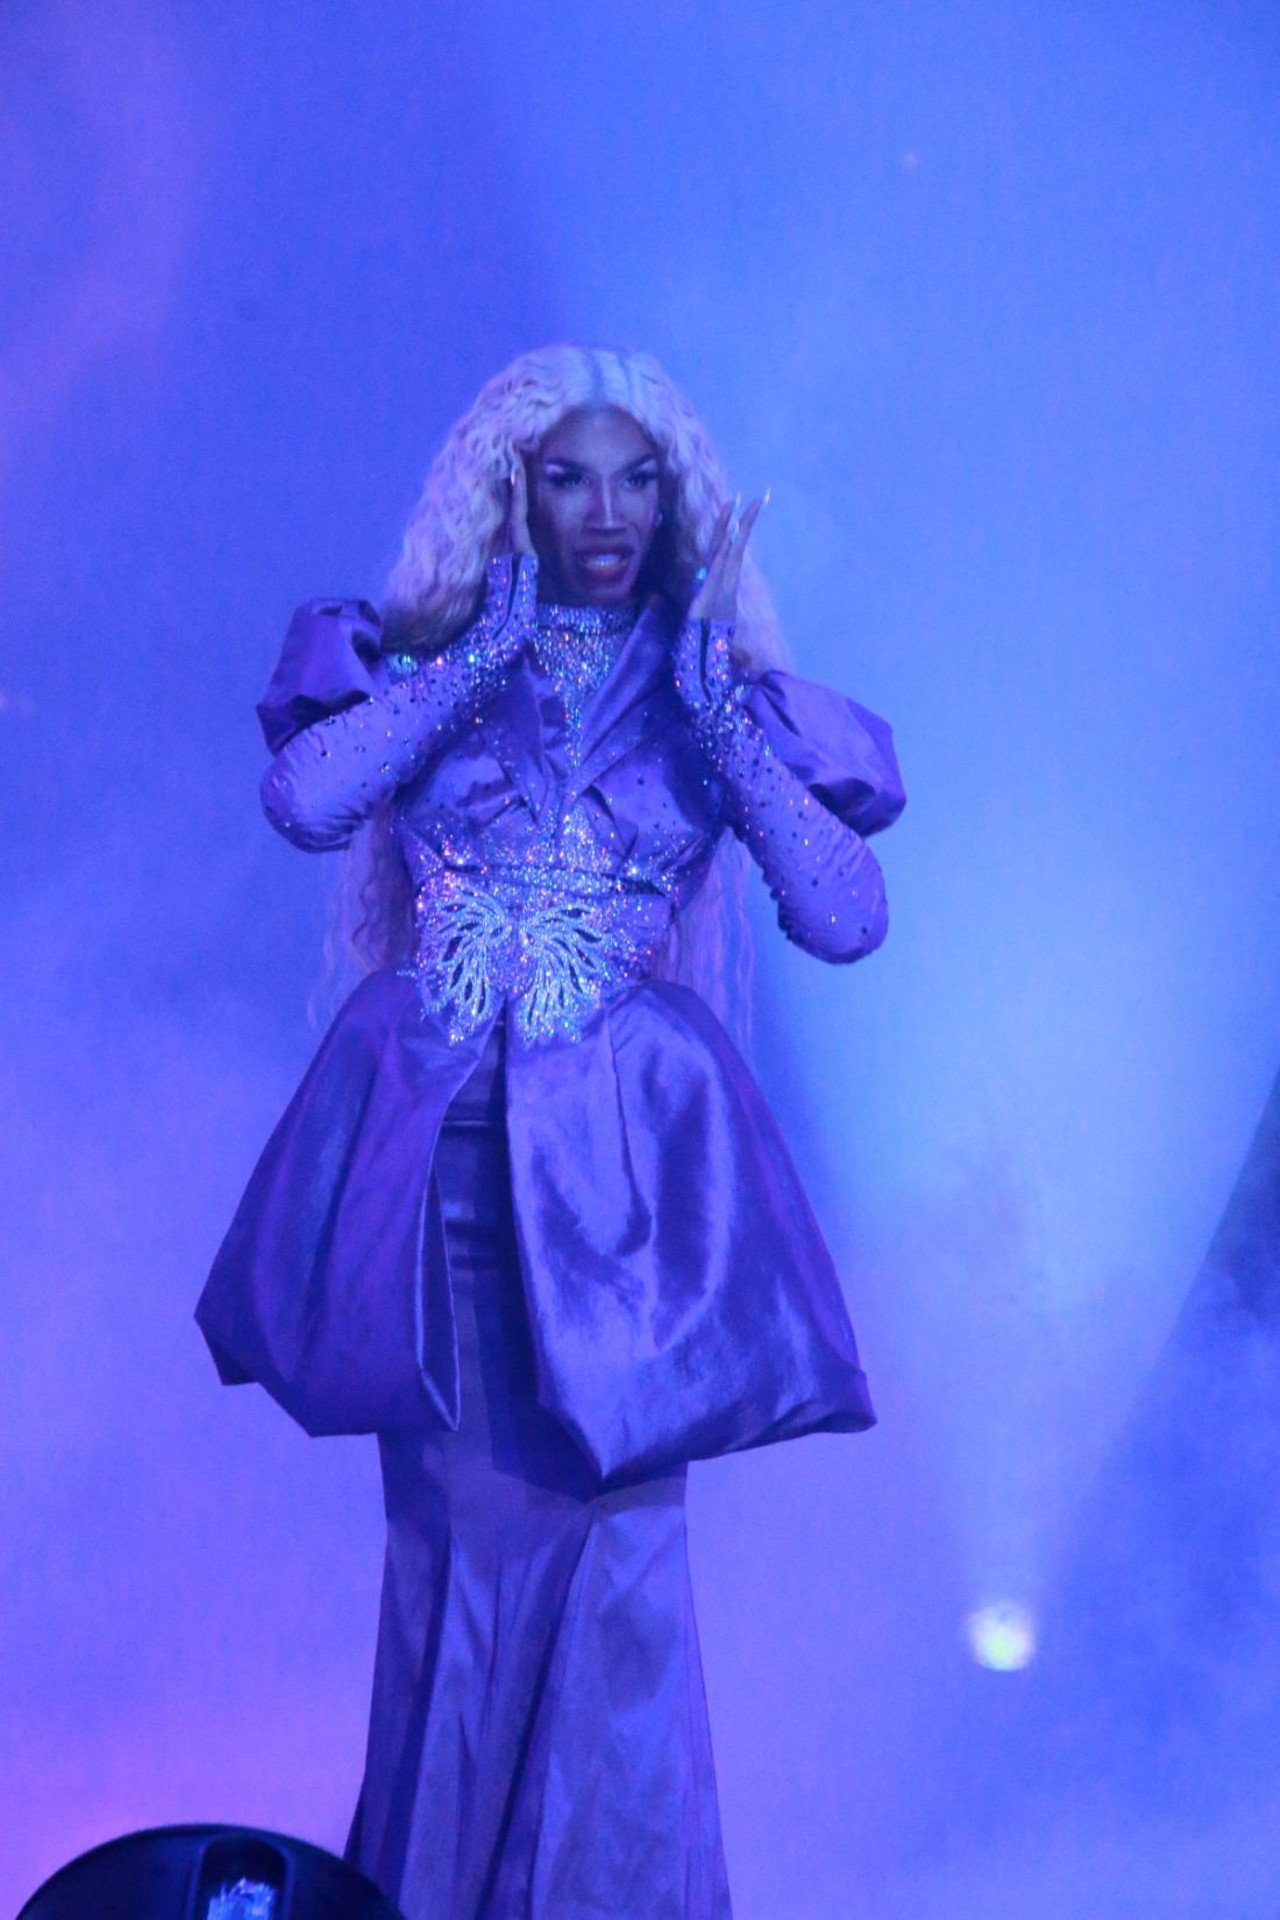 Everything We Saw at RuPaul's Drag Race